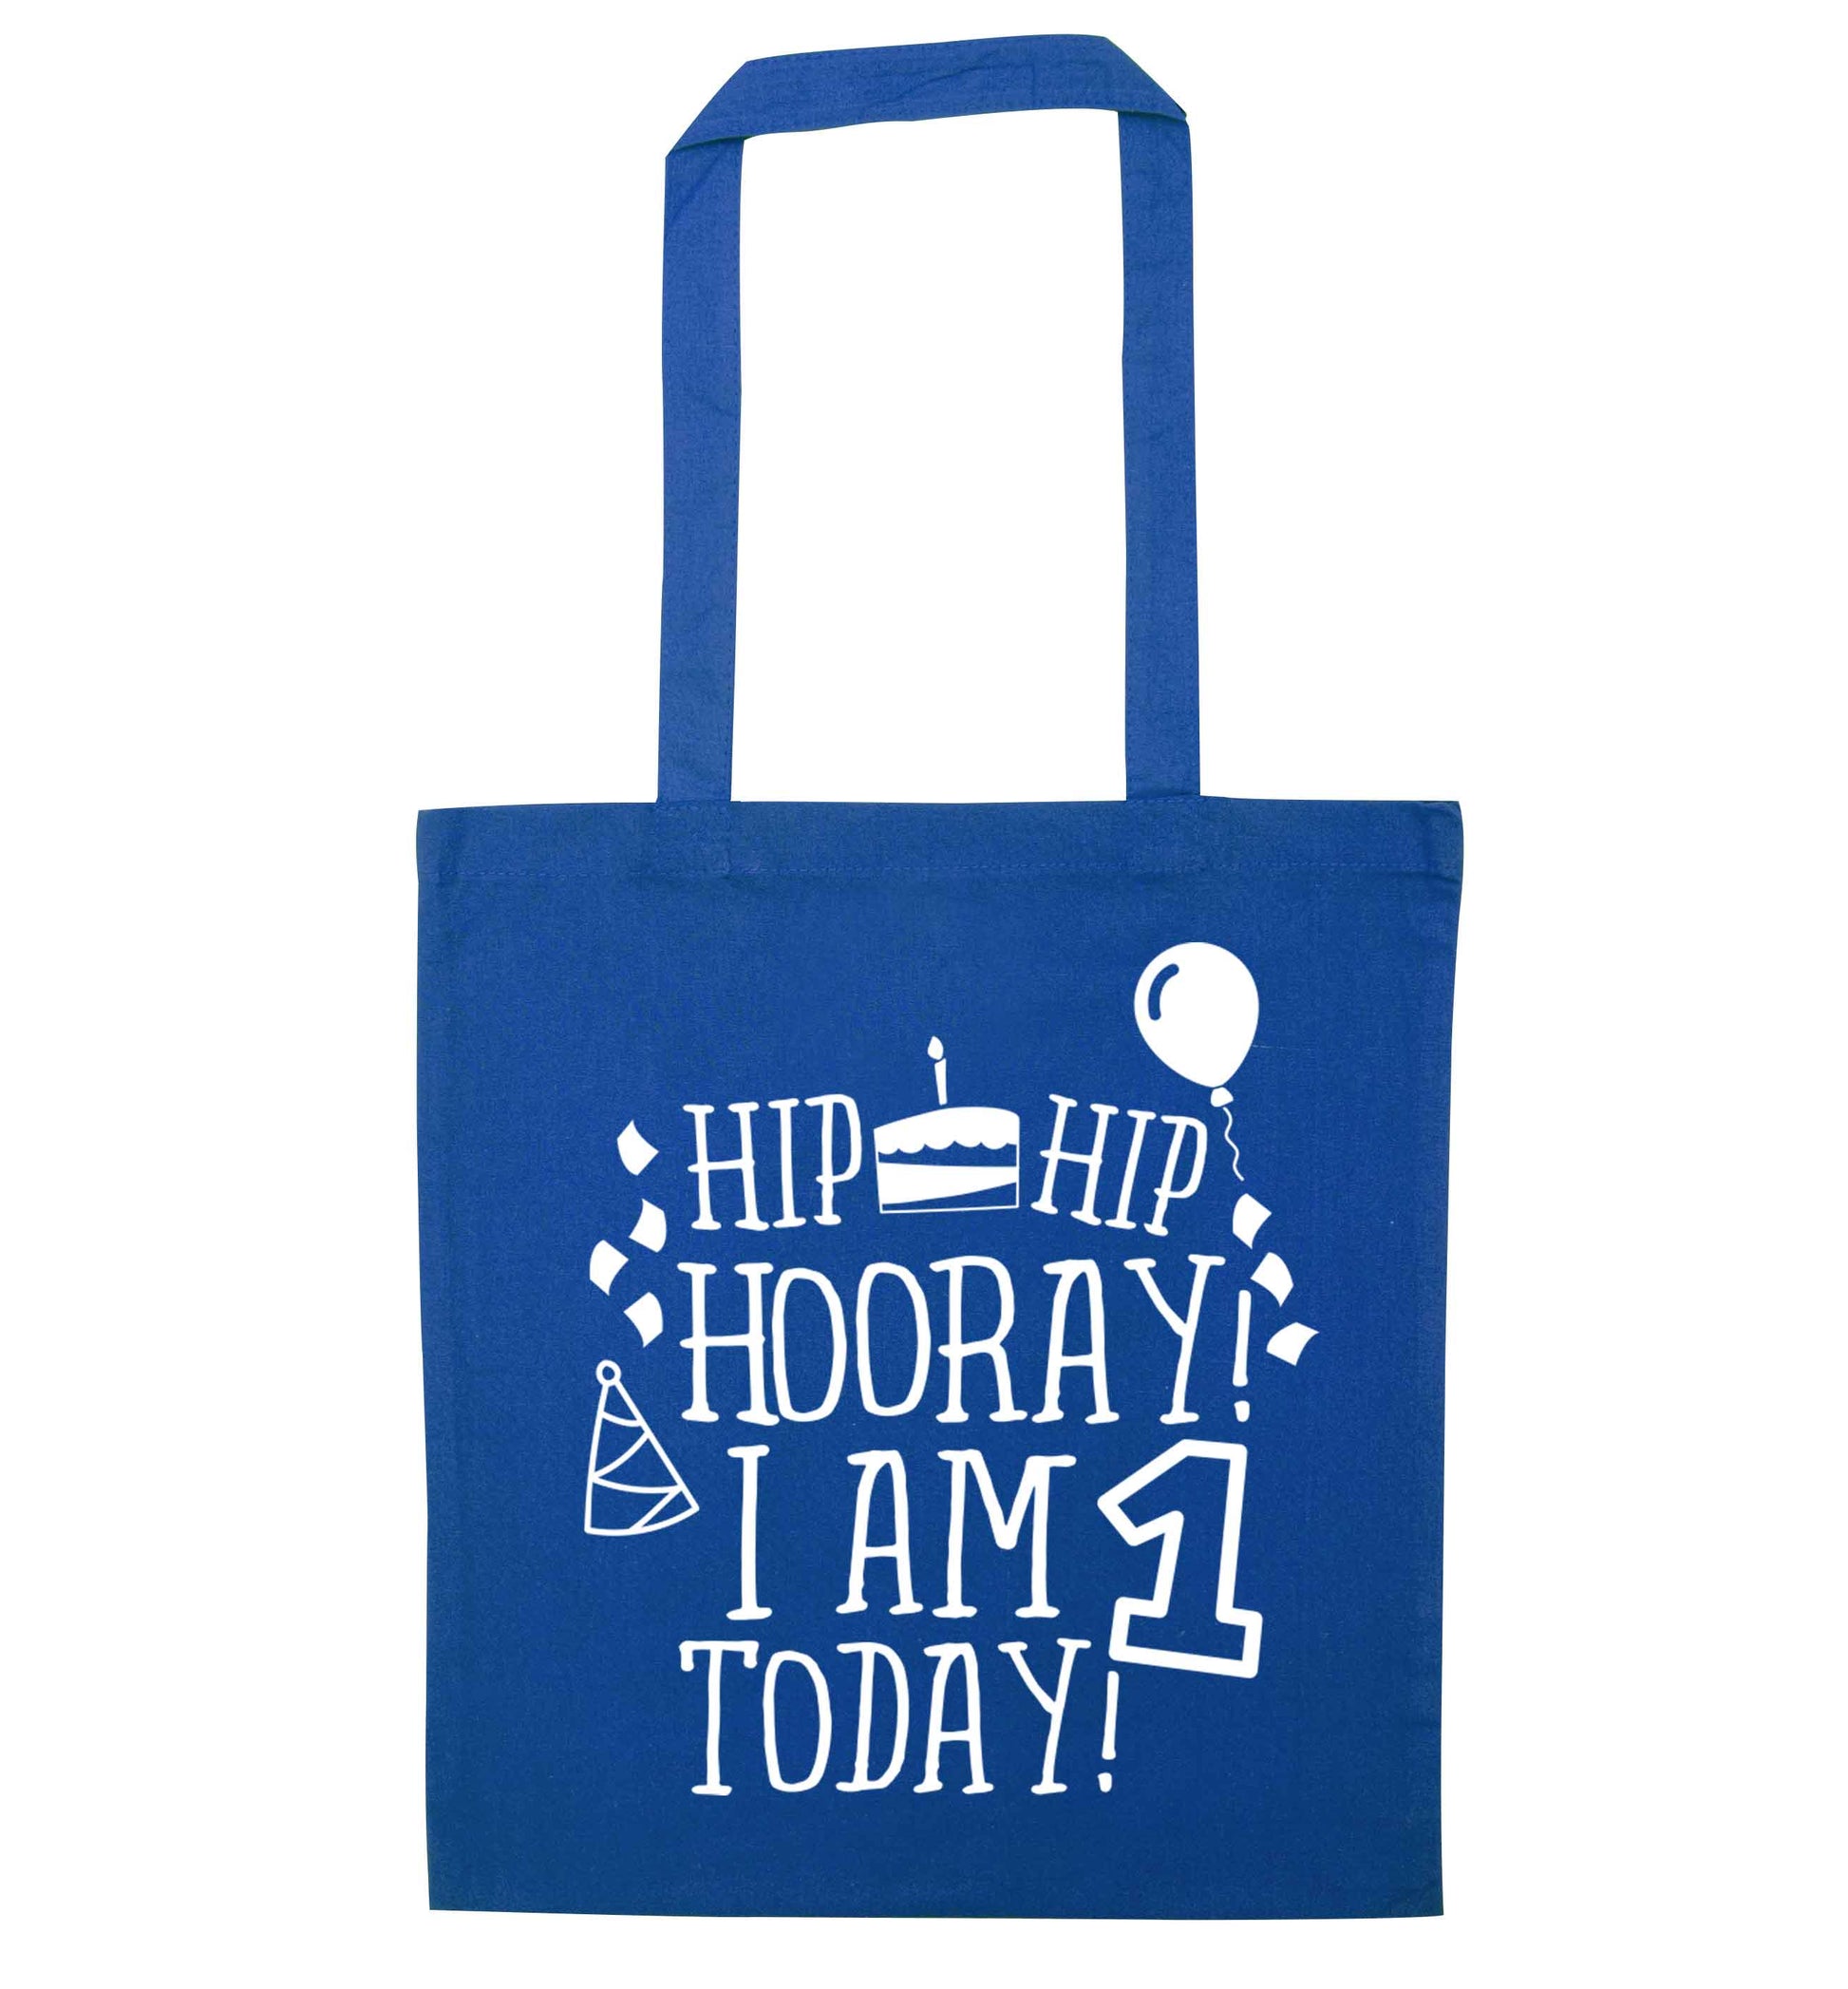 I am One Today blue tote bag